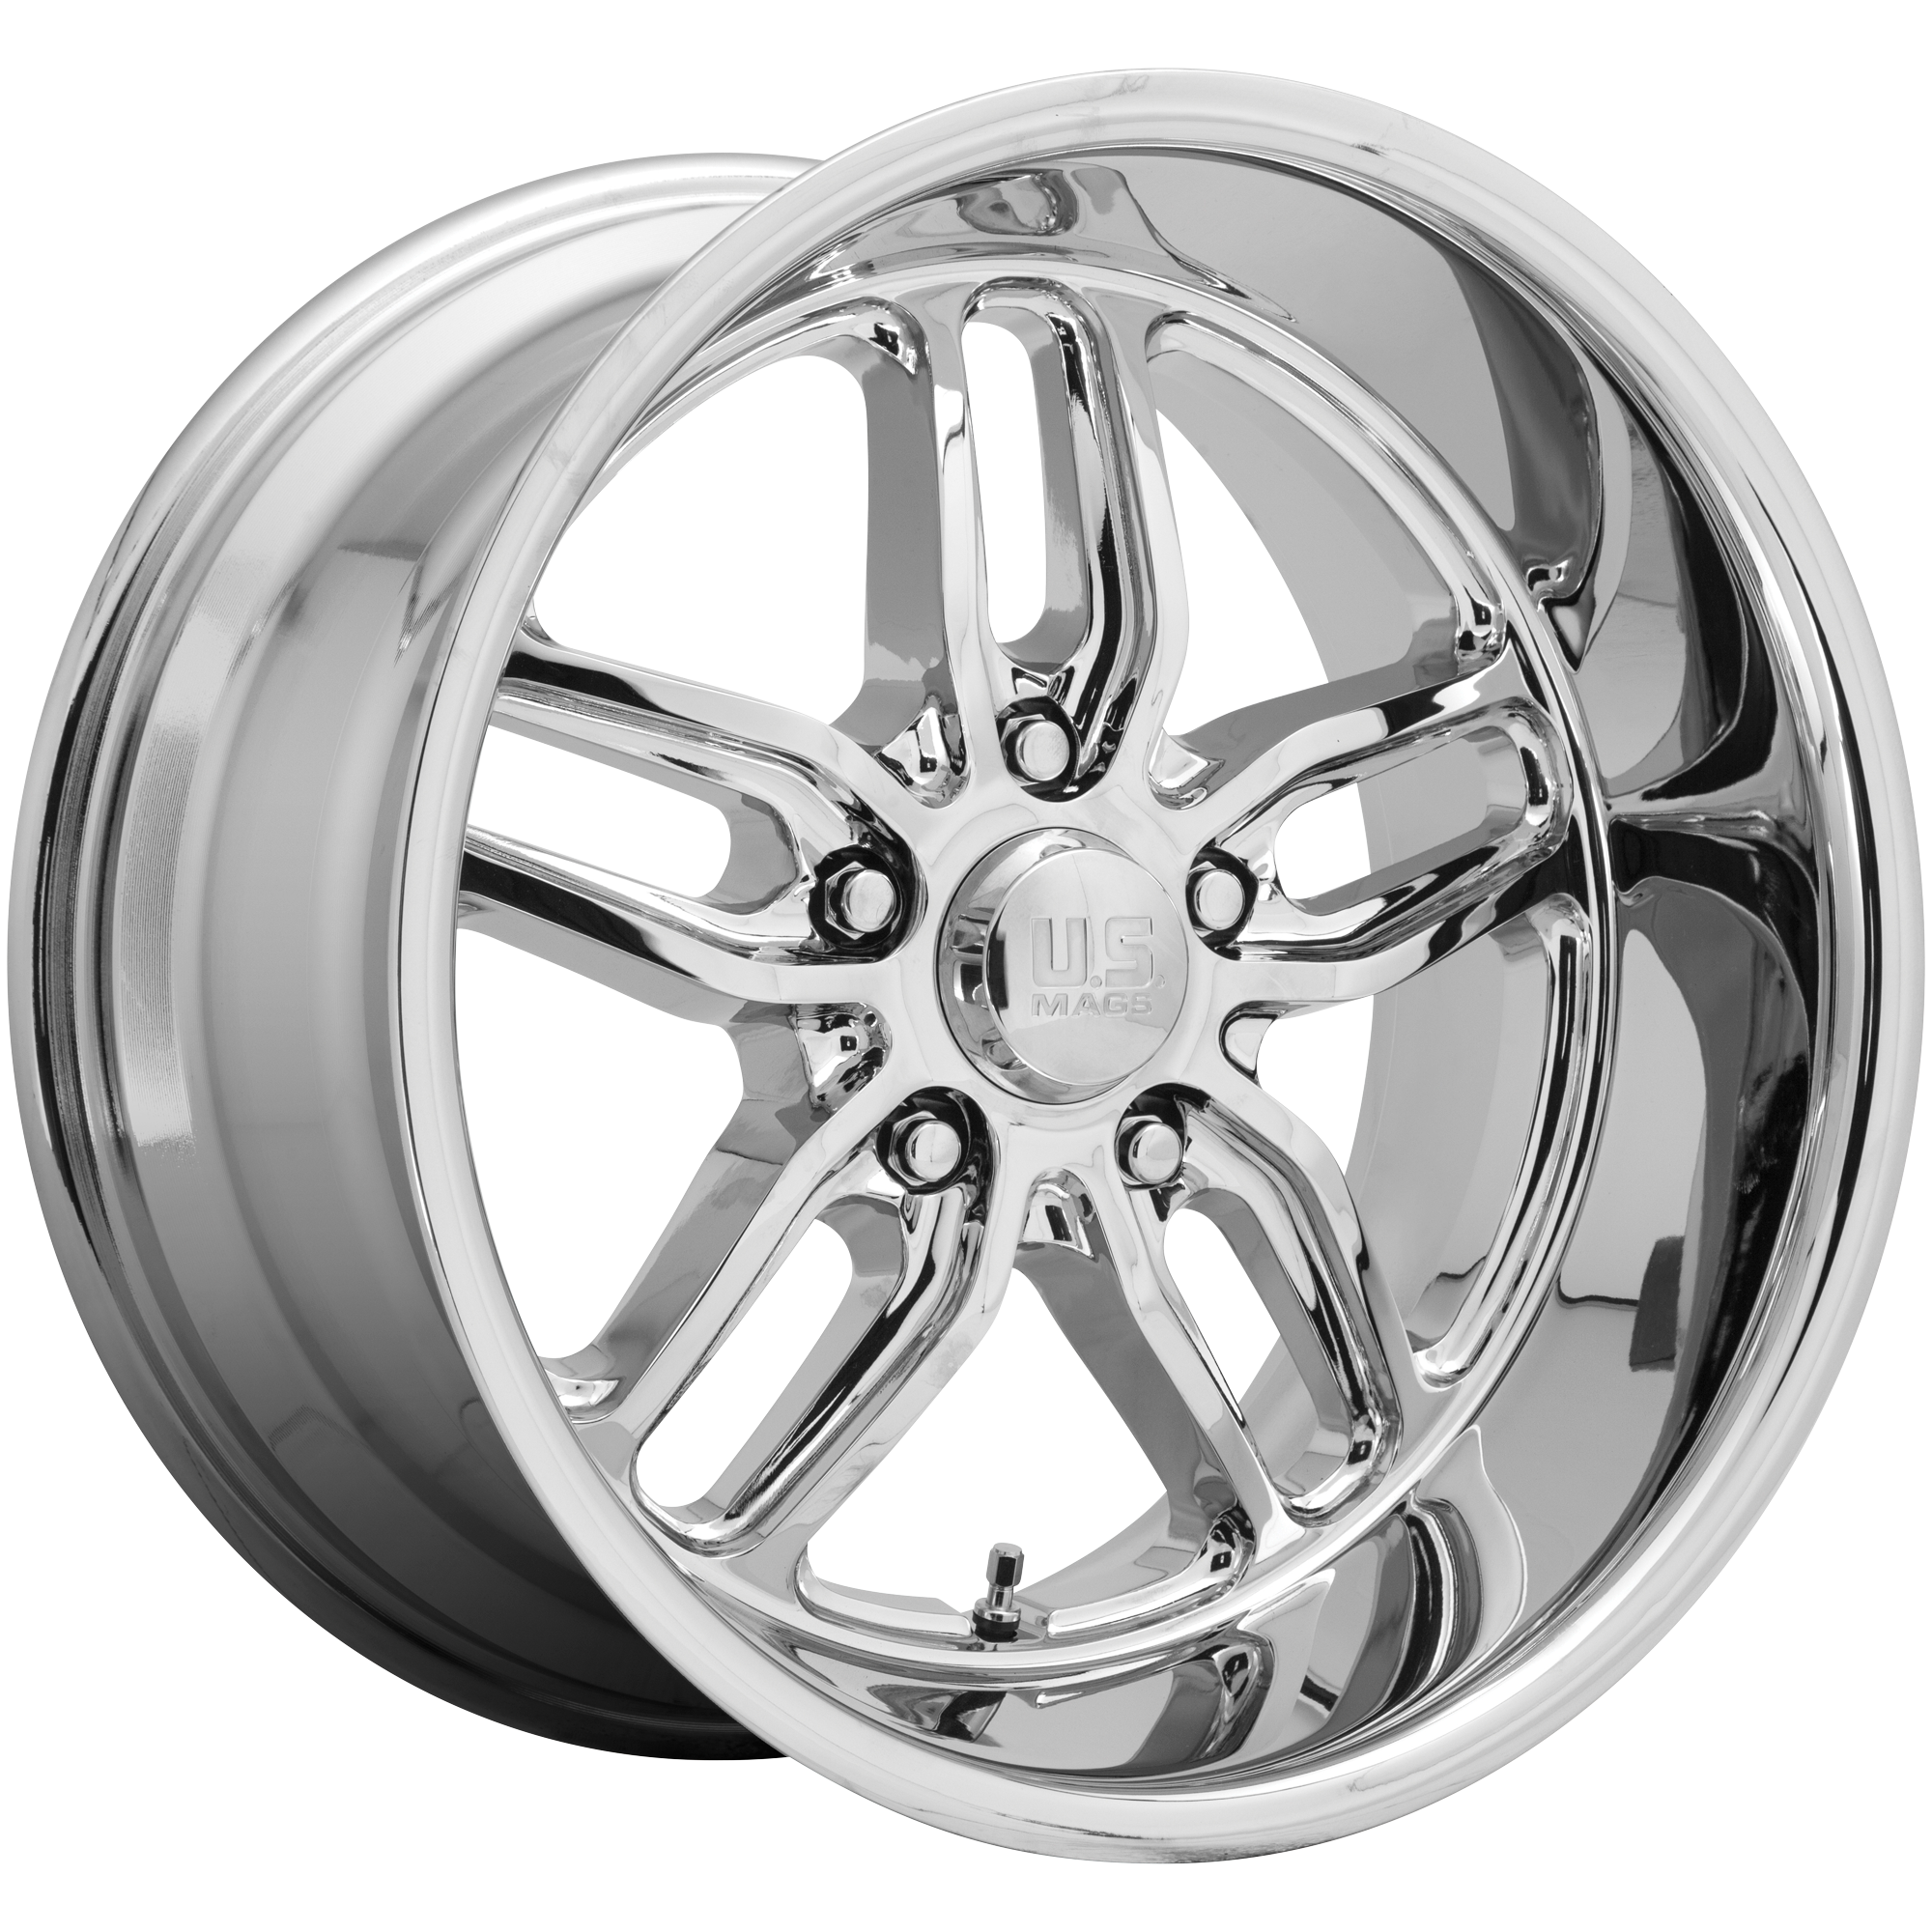 CTEN 20x8.5 5x120.65 CHROME PLATED (7 mm) - Tires and Engine Performance